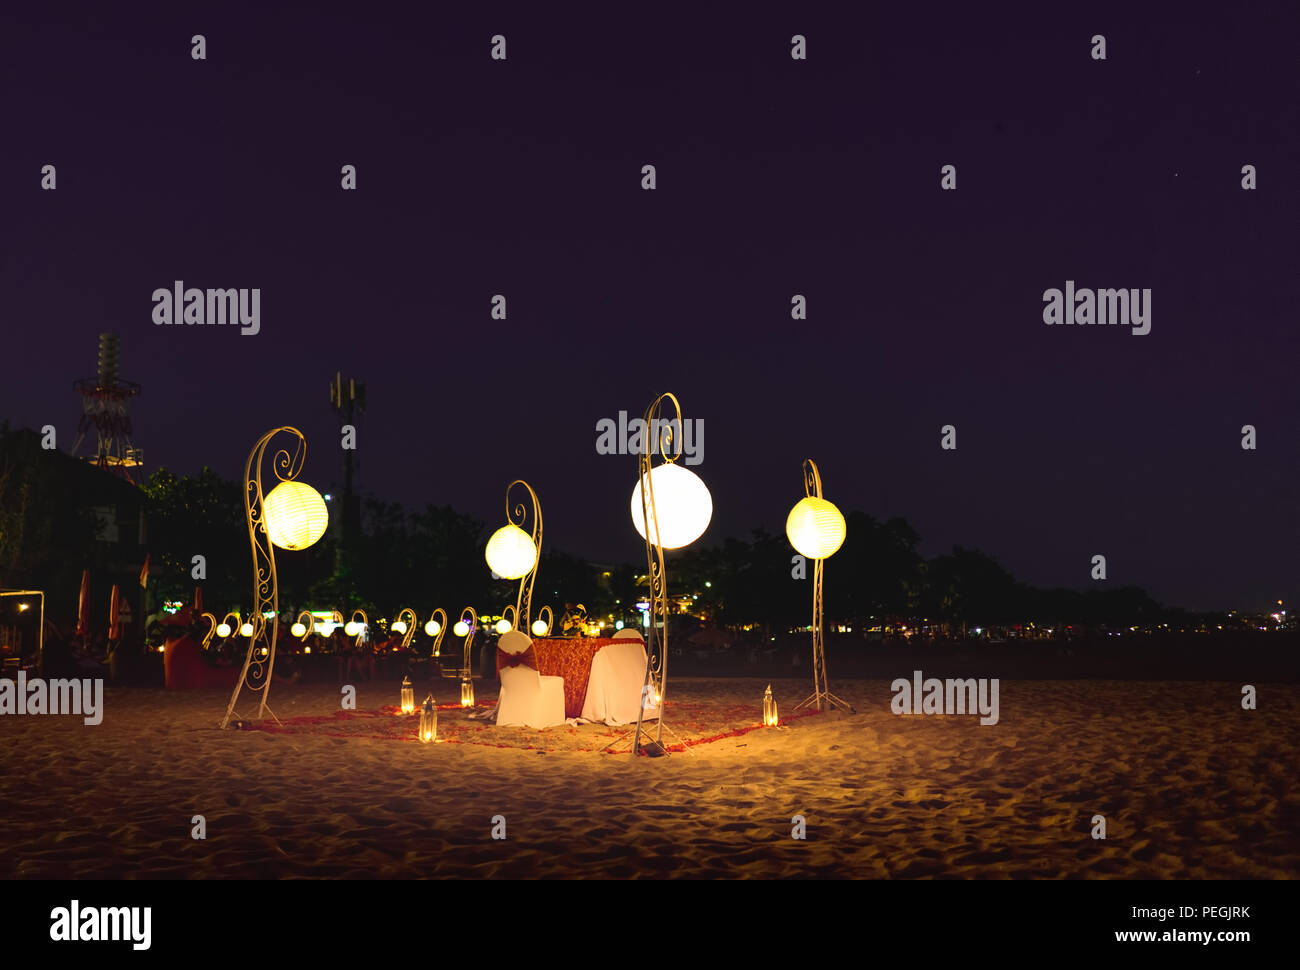 Outdoor Romantic Dinner Table For Two At Stary Night Sky At The Beach Like Restaurant Concept of 1001 Arabian Night Stock Photo